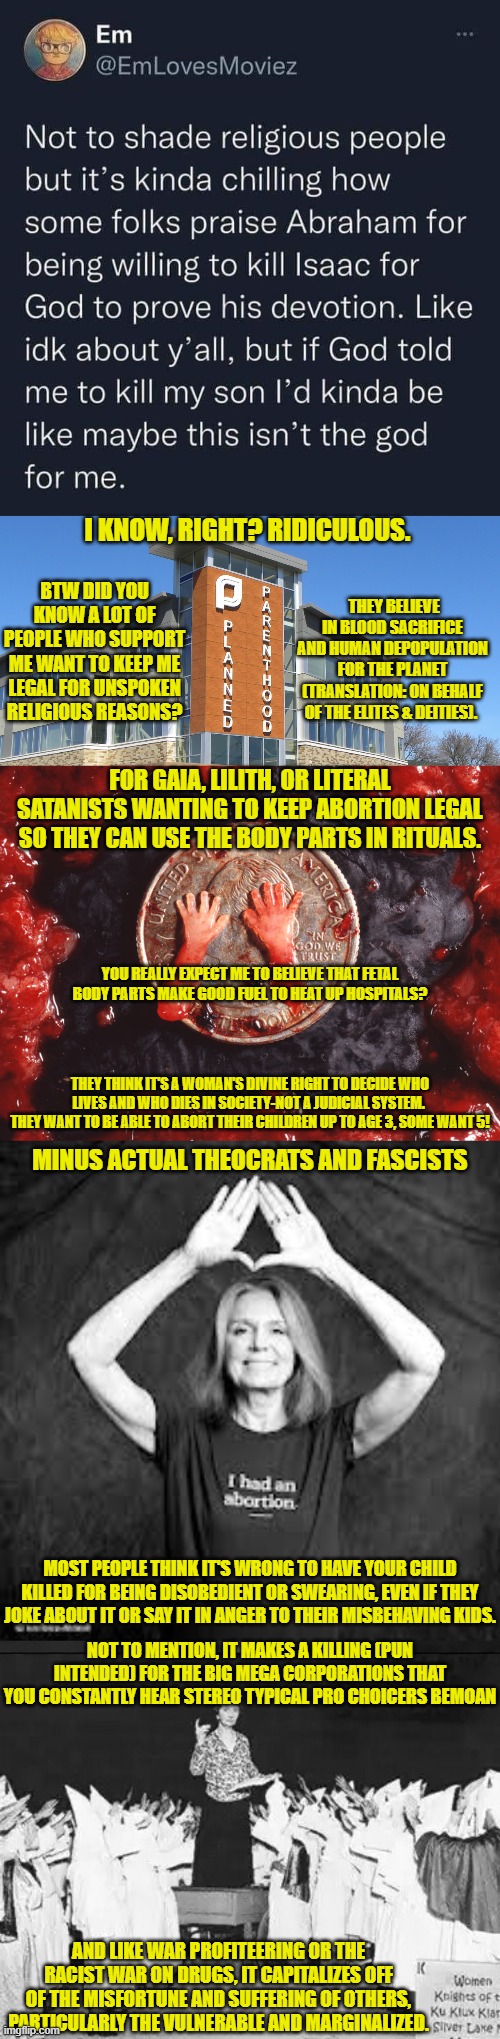 The "Separation of Church & State" argument is a 2 way street. They're doing it for a spirit, for an anti human religion. | I KNOW, RIGHT? RIDICULOUS. THEY BELIEVE IN BLOOD SACRIFICE AND HUMAN DEPOPULATION FOR THE PLANET
(TRANSLATION: ON BEHALF OF THE ELITES & DEITIES). BTW DID YOU KNOW A LOT OF PEOPLE WHO SUPPORT ME WANT TO KEEP ME LEGAL FOR UNSPOKEN RELIGIOUS REASONS? FOR GAIA, LILITH, OR LITERAL SATANISTS WANTING TO KEEP ABORTION LEGAL SO THEY CAN USE THE BODY PARTS IN RITUALS. YOU REALLY EXPECT ME TO BELIEVE THAT FETAL BODY PARTS MAKE GOOD FUEL TO HEAT UP HOSPITALS? THEY THINK IT'S A WOMAN'S DIVINE RIGHT TO DECIDE WHO LIVES AND WHO DIES IN SOCIETY-NOT A JUDICIAL SYSTEM. 
THEY WANT TO BE ABLE TO ABORT THEIR CHILDREN UP TO AGE 3, SOME WANT 5! MINUS ACTUAL THEOCRATS AND FASCISTS; MOST PEOPLE THINK IT'S WRONG TO HAVE YOUR CHILD KILLED FOR BEING DISOBEDIENT OR SWEARING, EVEN IF THEY JOKE ABOUT IT OR SAY IT IN ANGER TO THEIR MISBEHAVING KIDS. NOT TO MENTION, IT MAKES A KILLING (PUN INTENDED) FOR THE BIG MEGA CORPORATIONS THAT YOU CONSTANTLY HEAR STEREO TYPICAL PRO CHOICERS BEMOAN; AND LIKE WAR PROFITEERING OR THE RACIST WAR ON DRUGS, IT CAPITALIZES OFF OF THE MISFORTUNE AND SUFFERING OF OTHERS, PARTICULARLY THE VULNERABLE AND MARGINALIZED. | image tagged in planned parenthood,margaret sanger planned parenthood founder addresses klan rally,illuminati,sacrifice,occult,religions | made w/ Imgflip meme maker